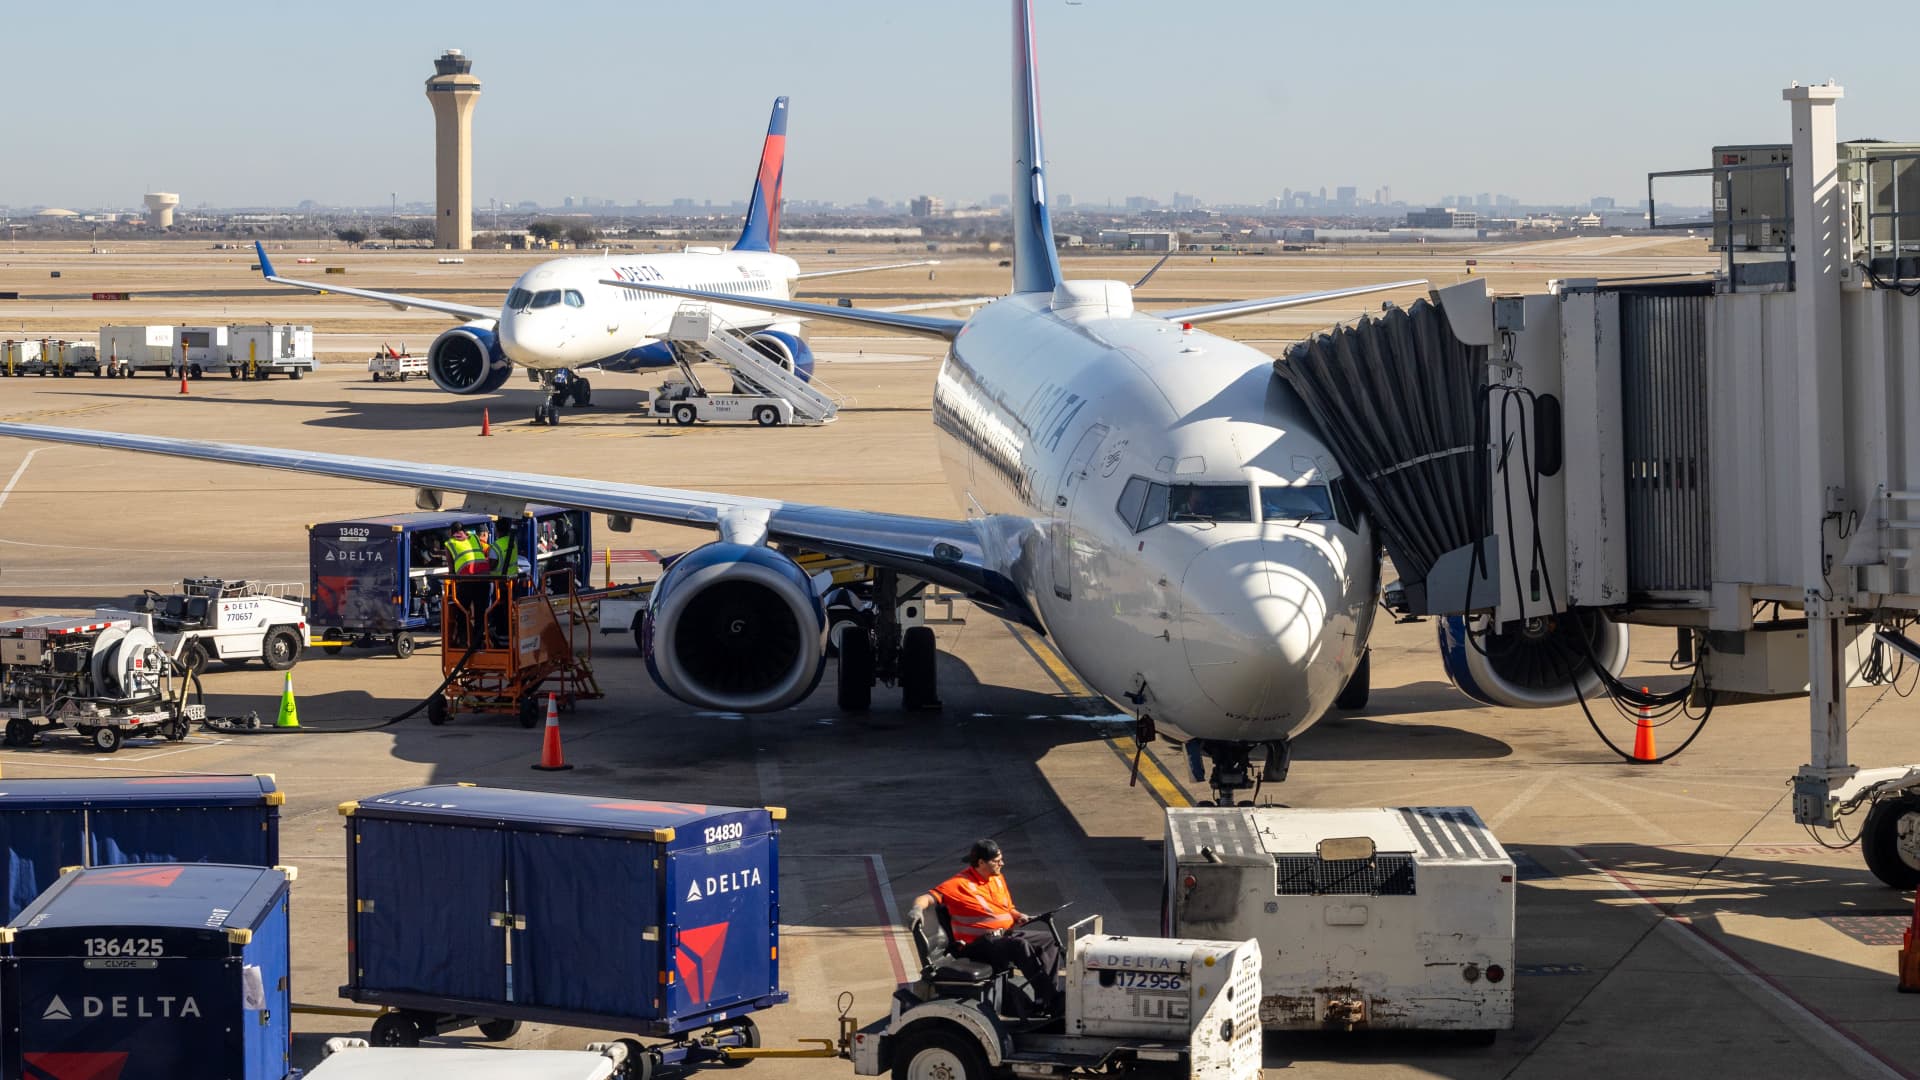 Winter weather disrupts hundreds of flights across Texas – CNBC